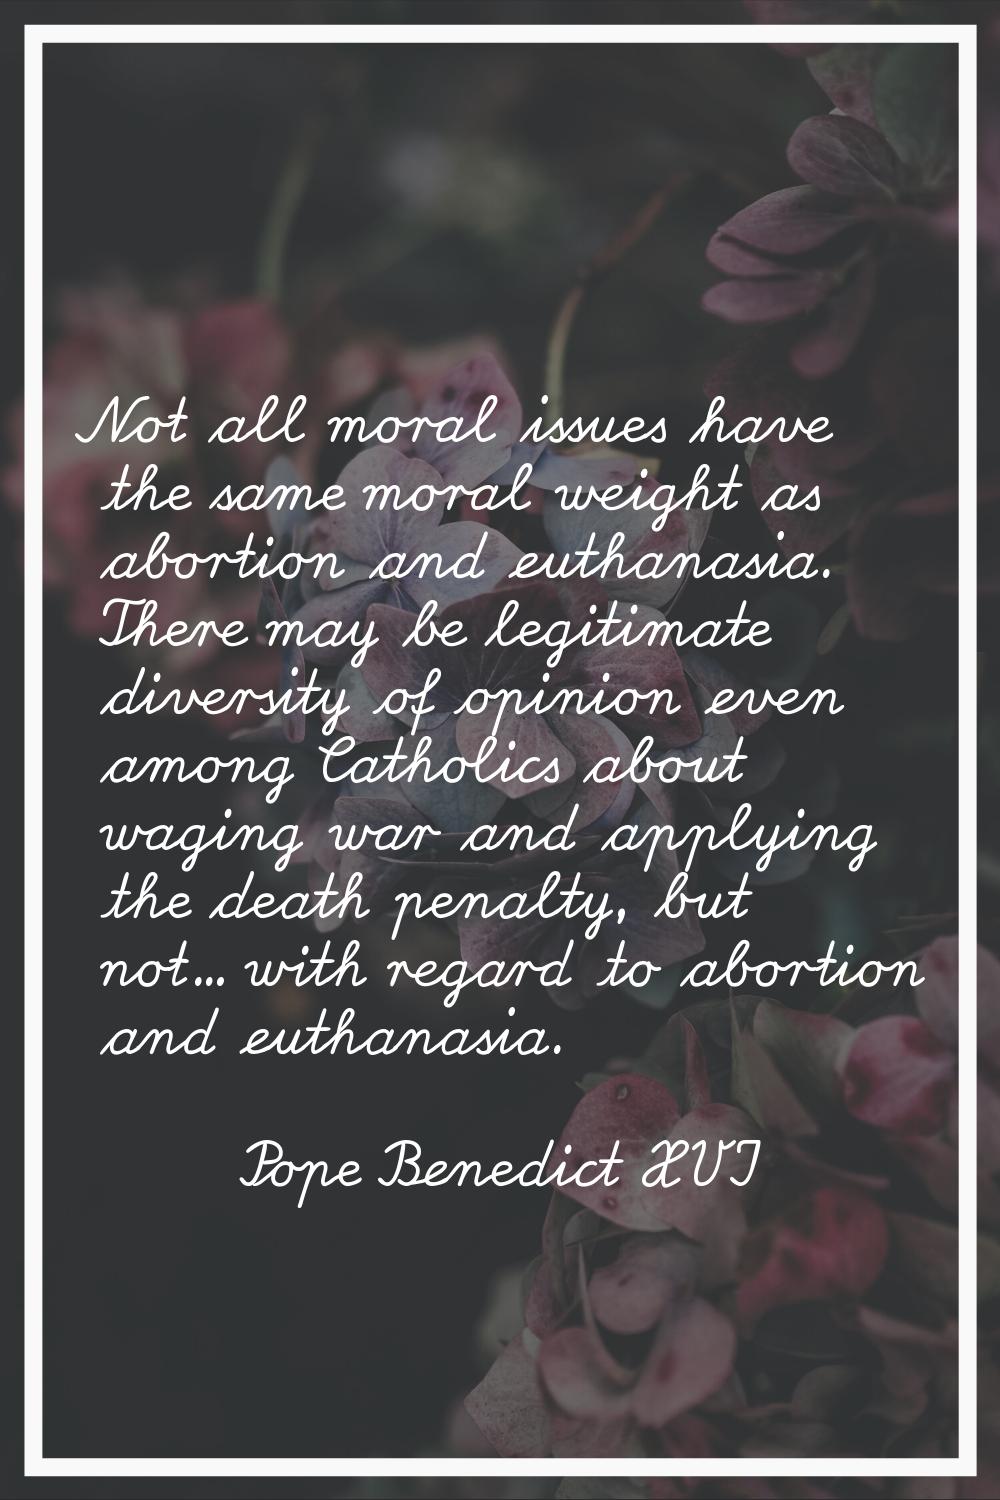 Not all moral issues have the same moral weight as abortion and euthanasia. There may be legitimate